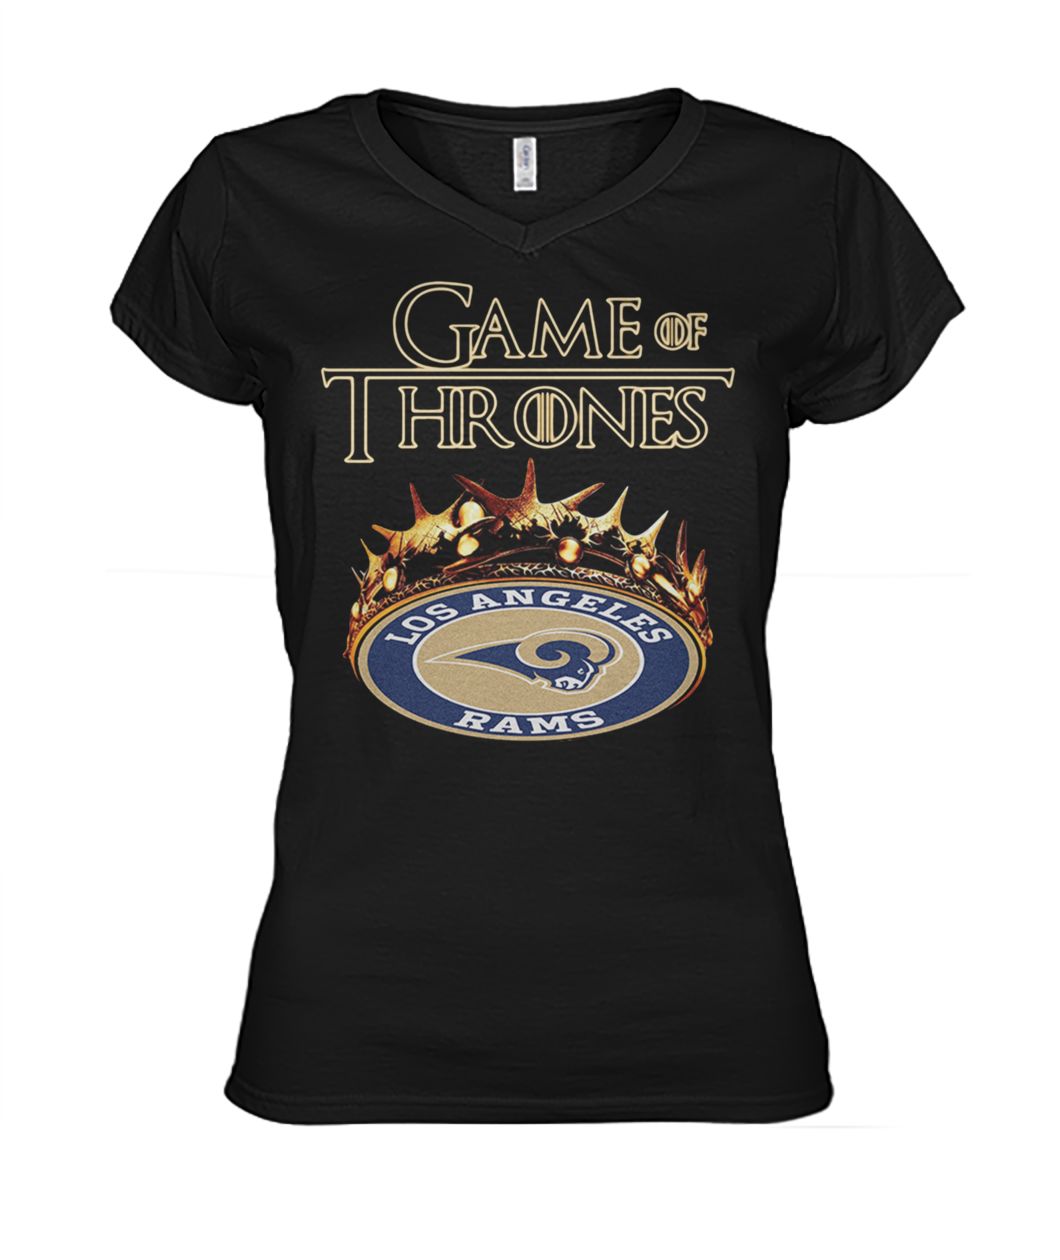 Game of thrones crown los angeles rams women's v-neck